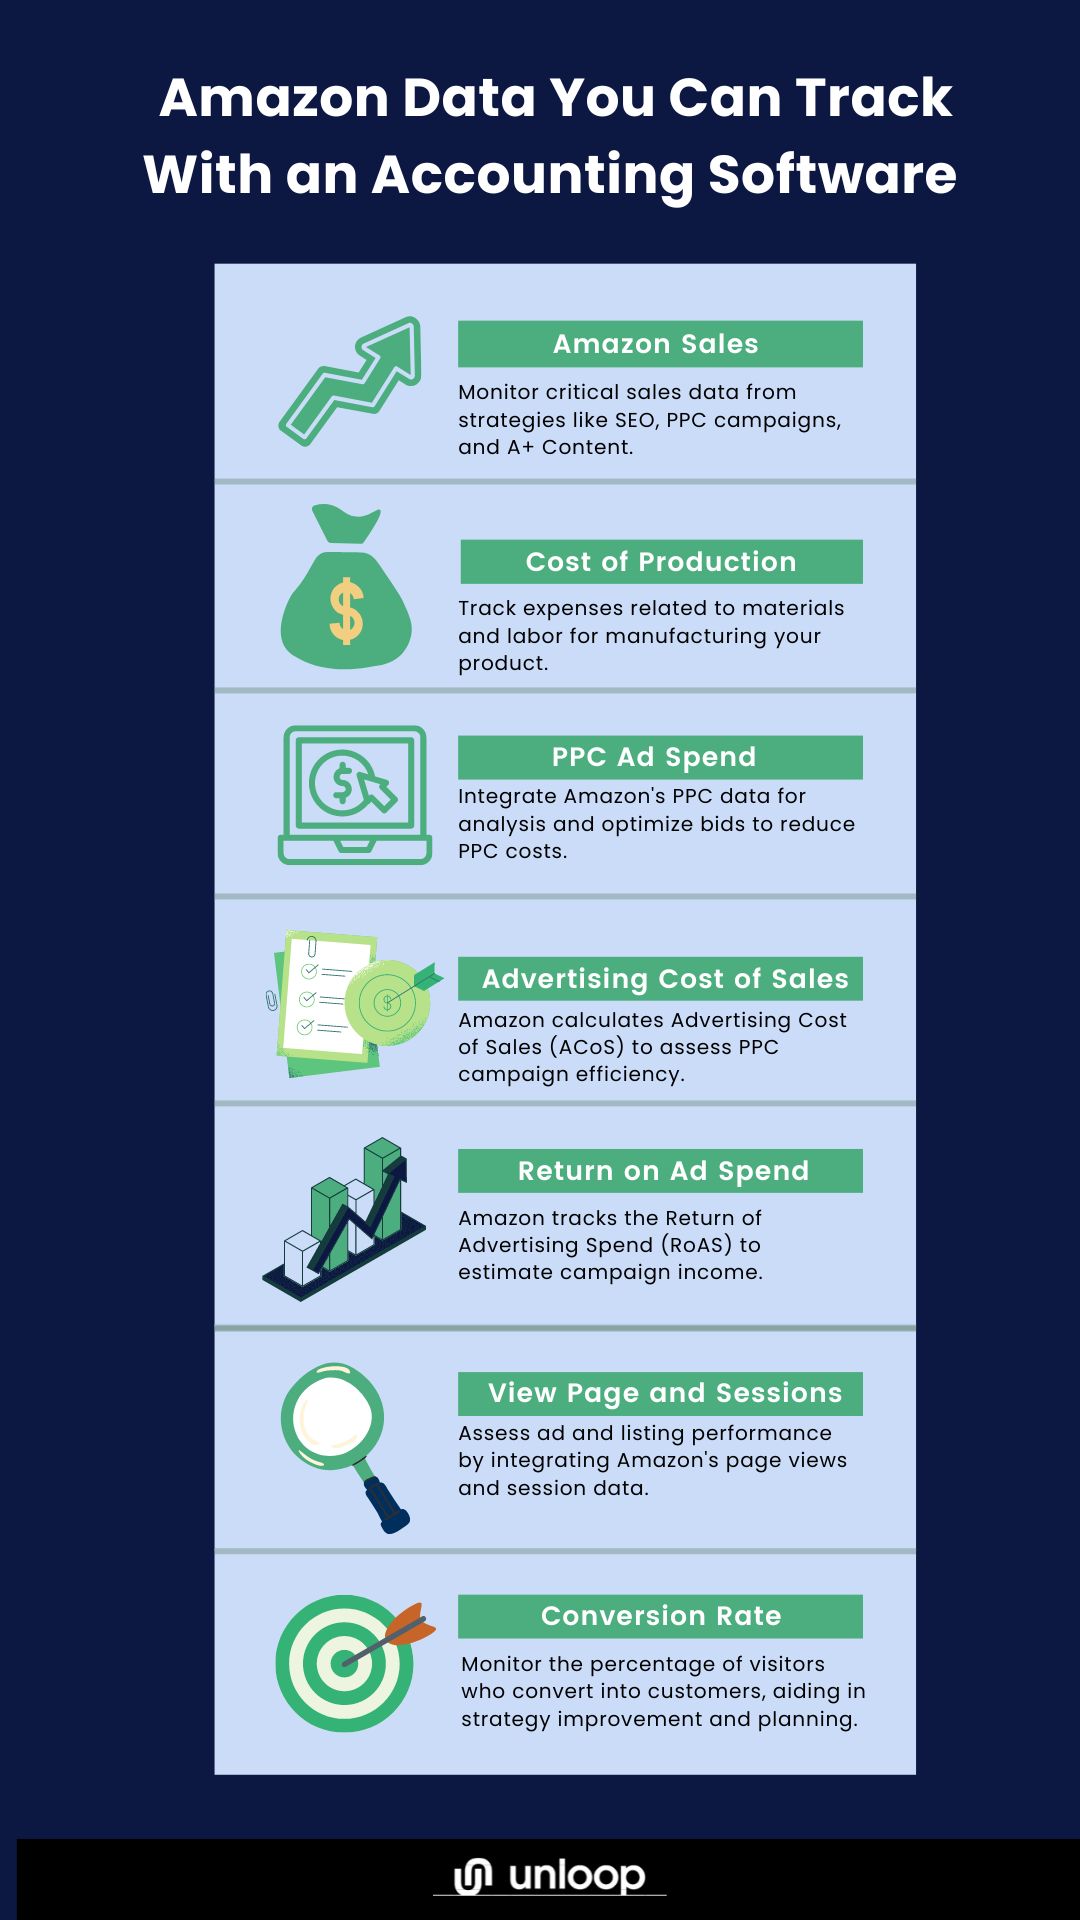 An infographic showing essential data tracked through accounting software for Amazon sellers.